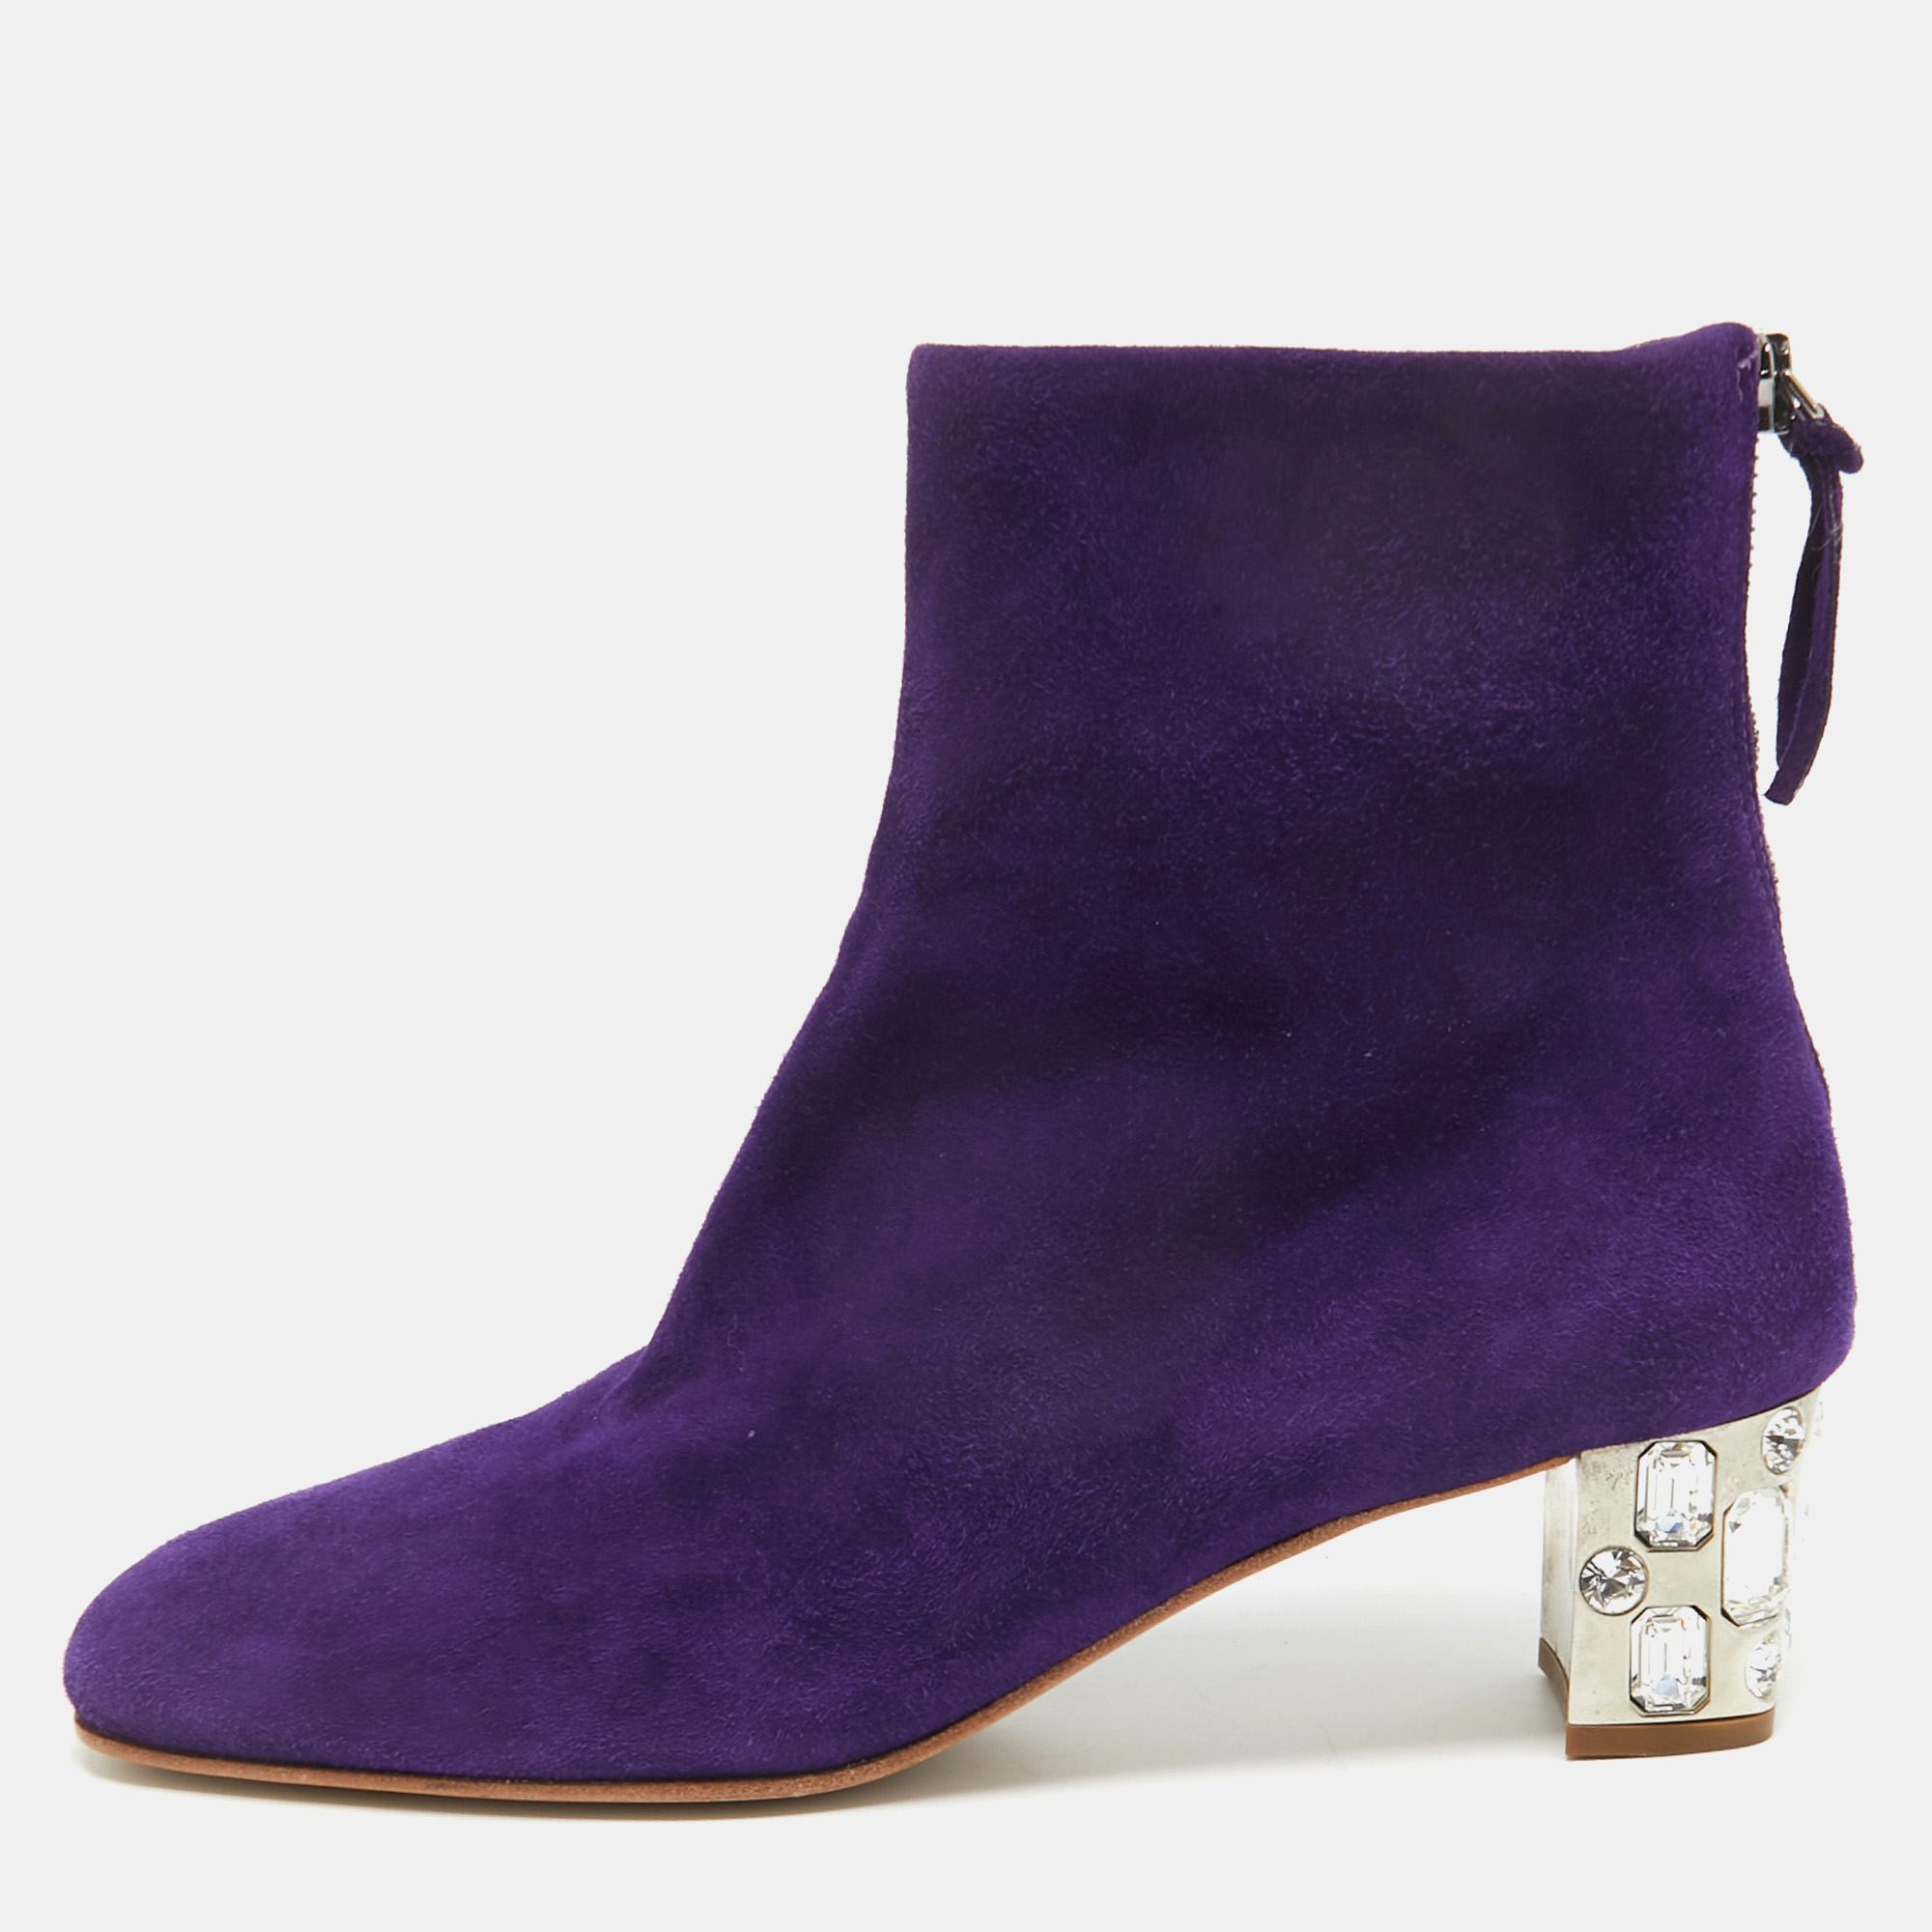 Miu Miu Purple Suede  Crystal Embellished Ankle Boots Size 37